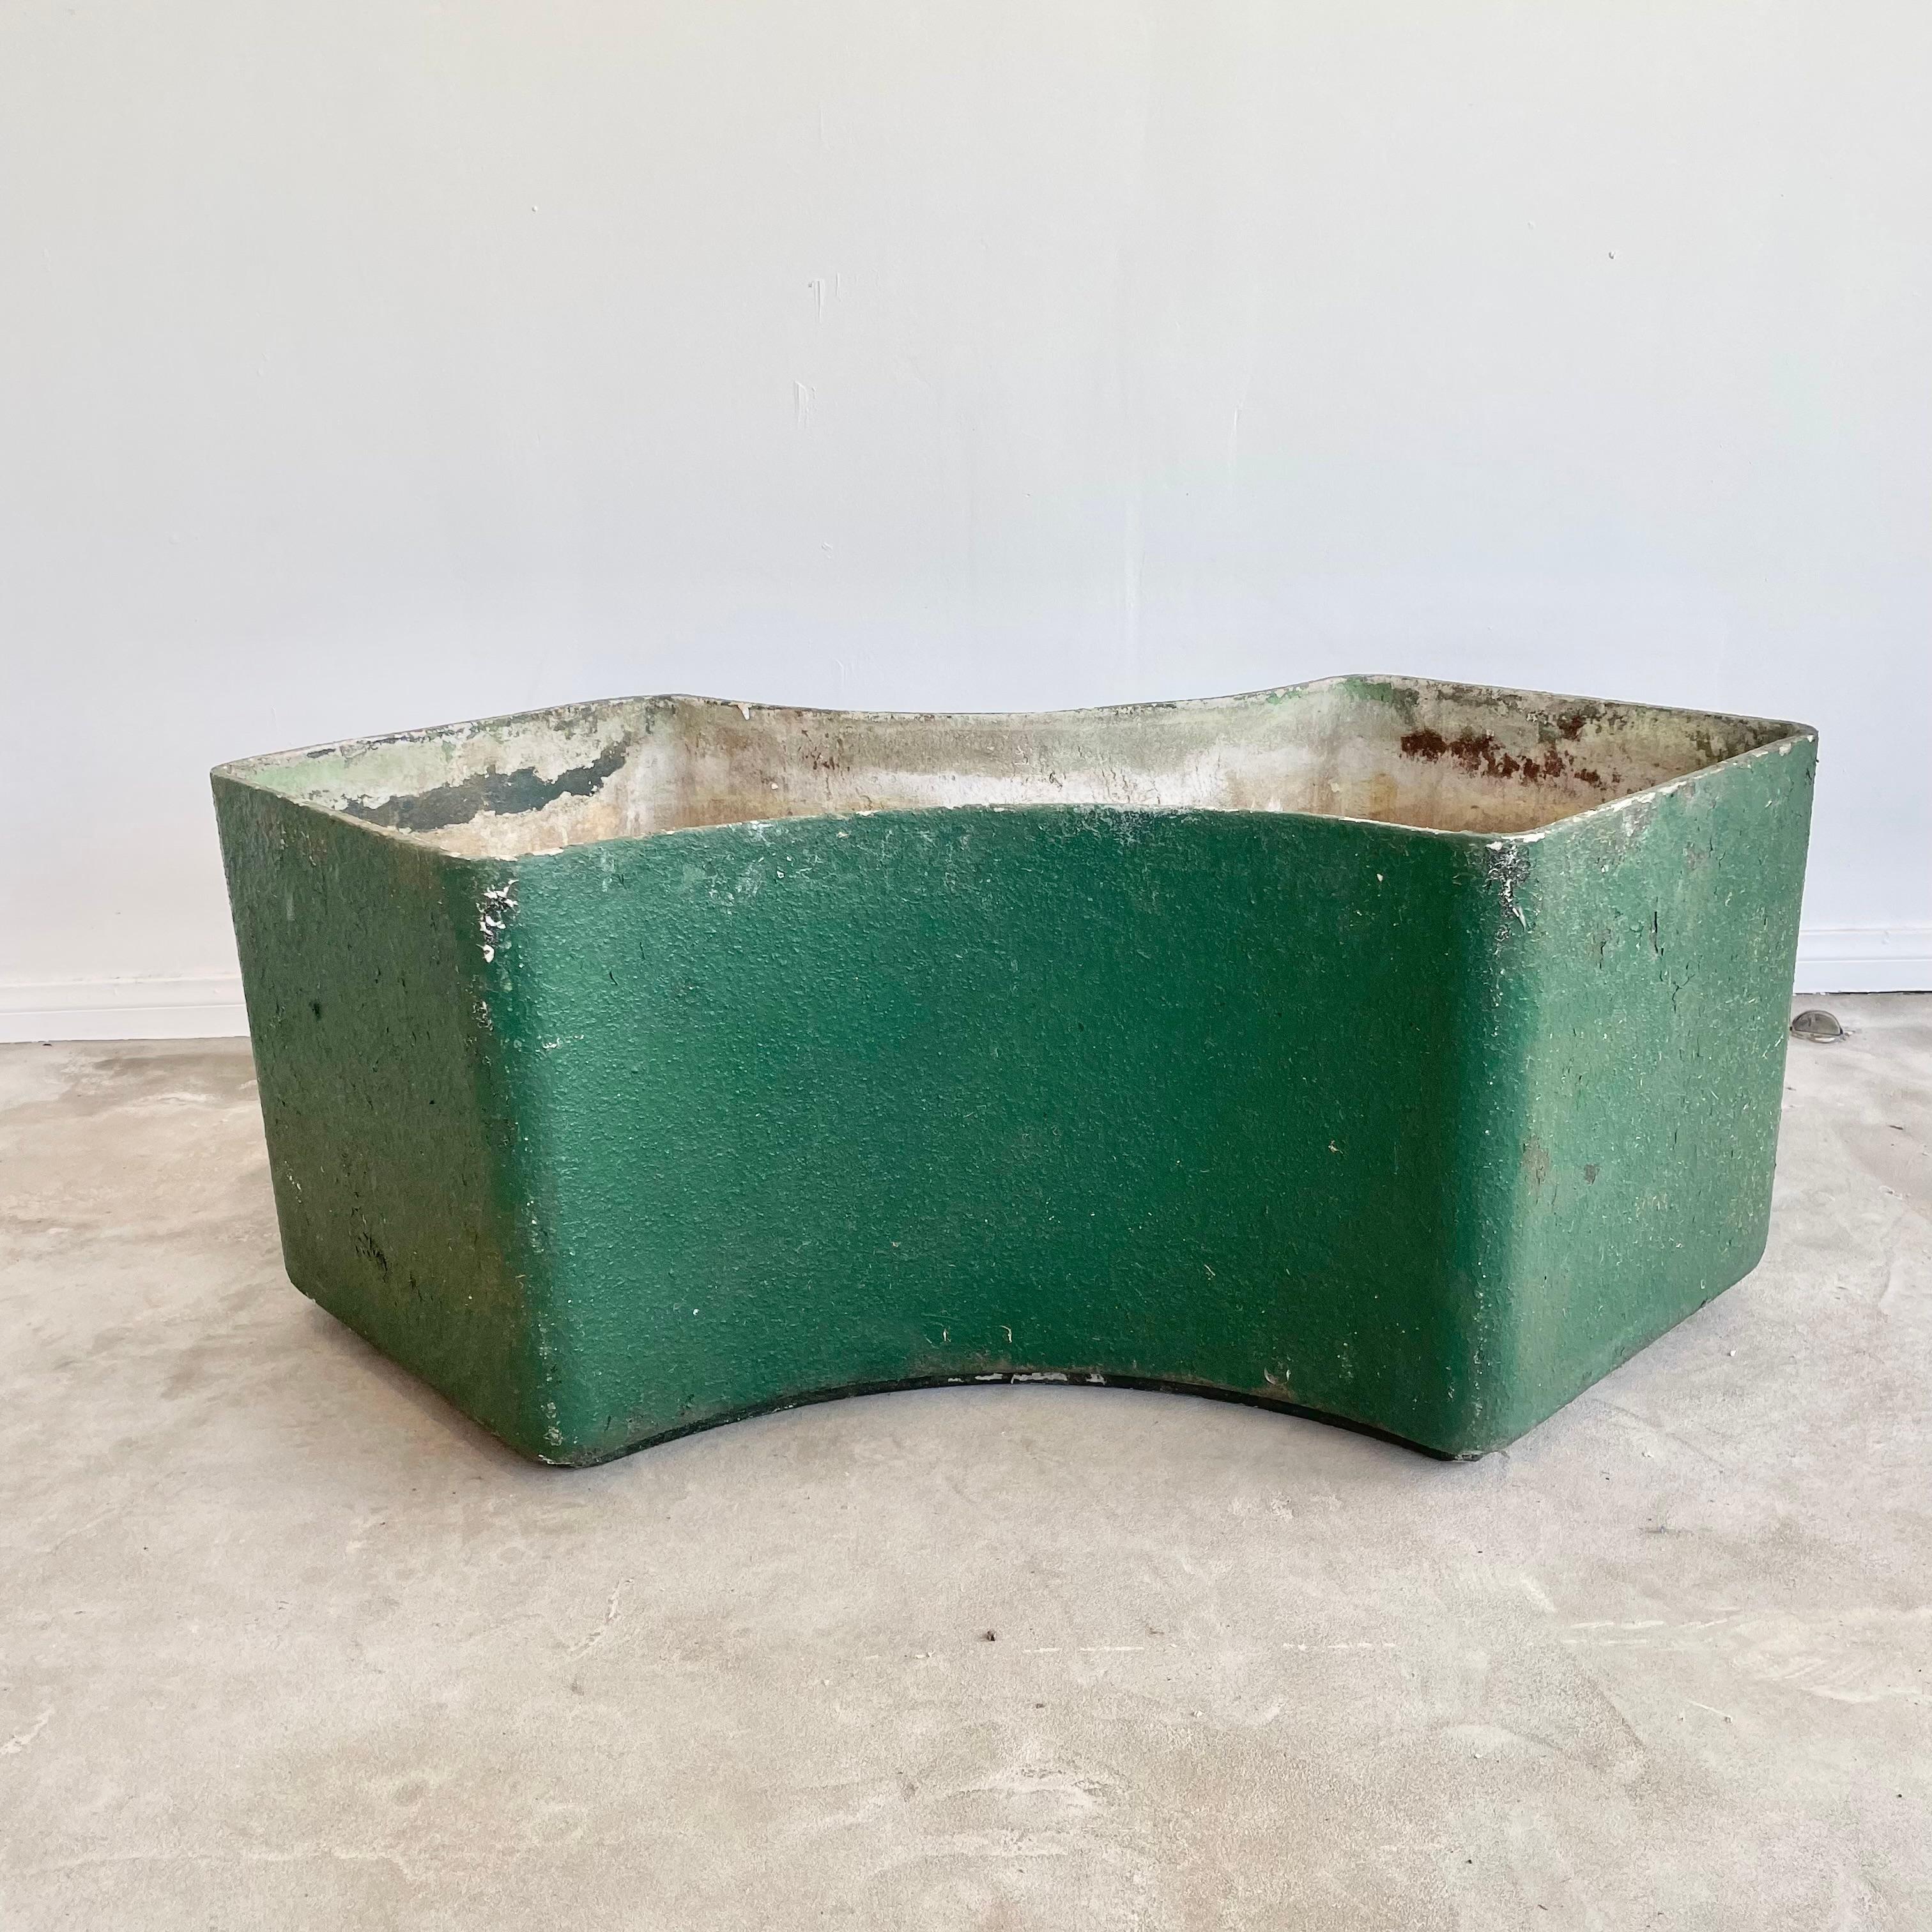 Monumental Willy Guhl Concrete Arrowhead Planter, 1960s, Switzerland In Good Condition For Sale In Los Angeles, CA